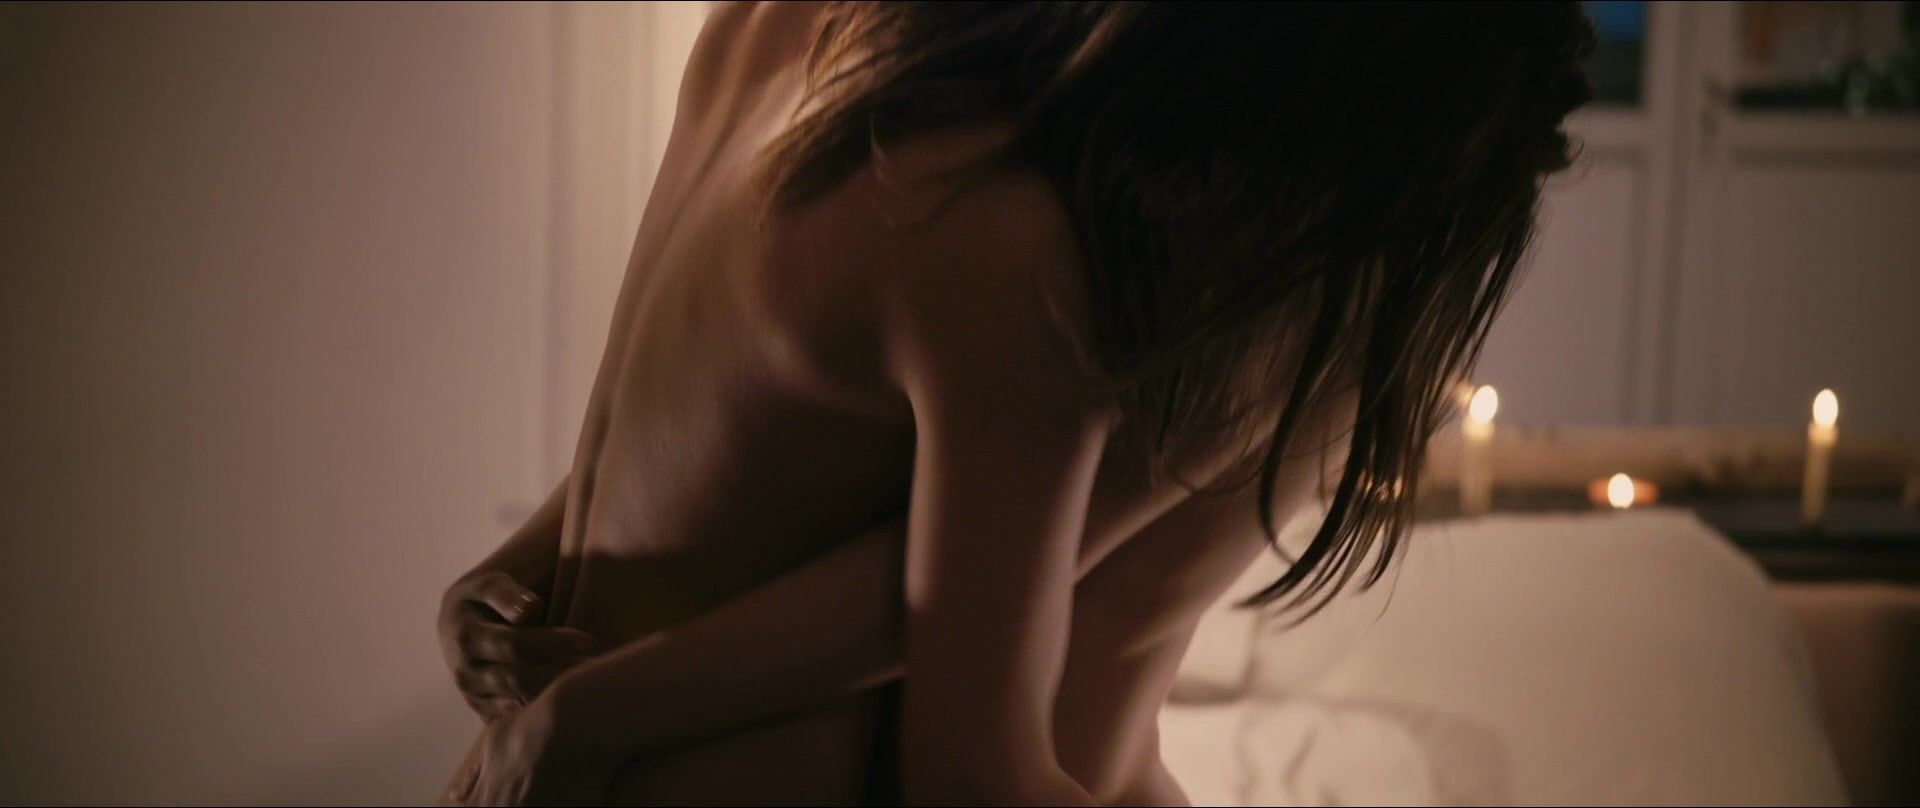 Shavedpussy Best lesbian scene in movies | Adele Exarchopoulos nude & Léa Seydoux naked | The film "Blue Is The Warmest Color" (2013) EscortGuide - 1